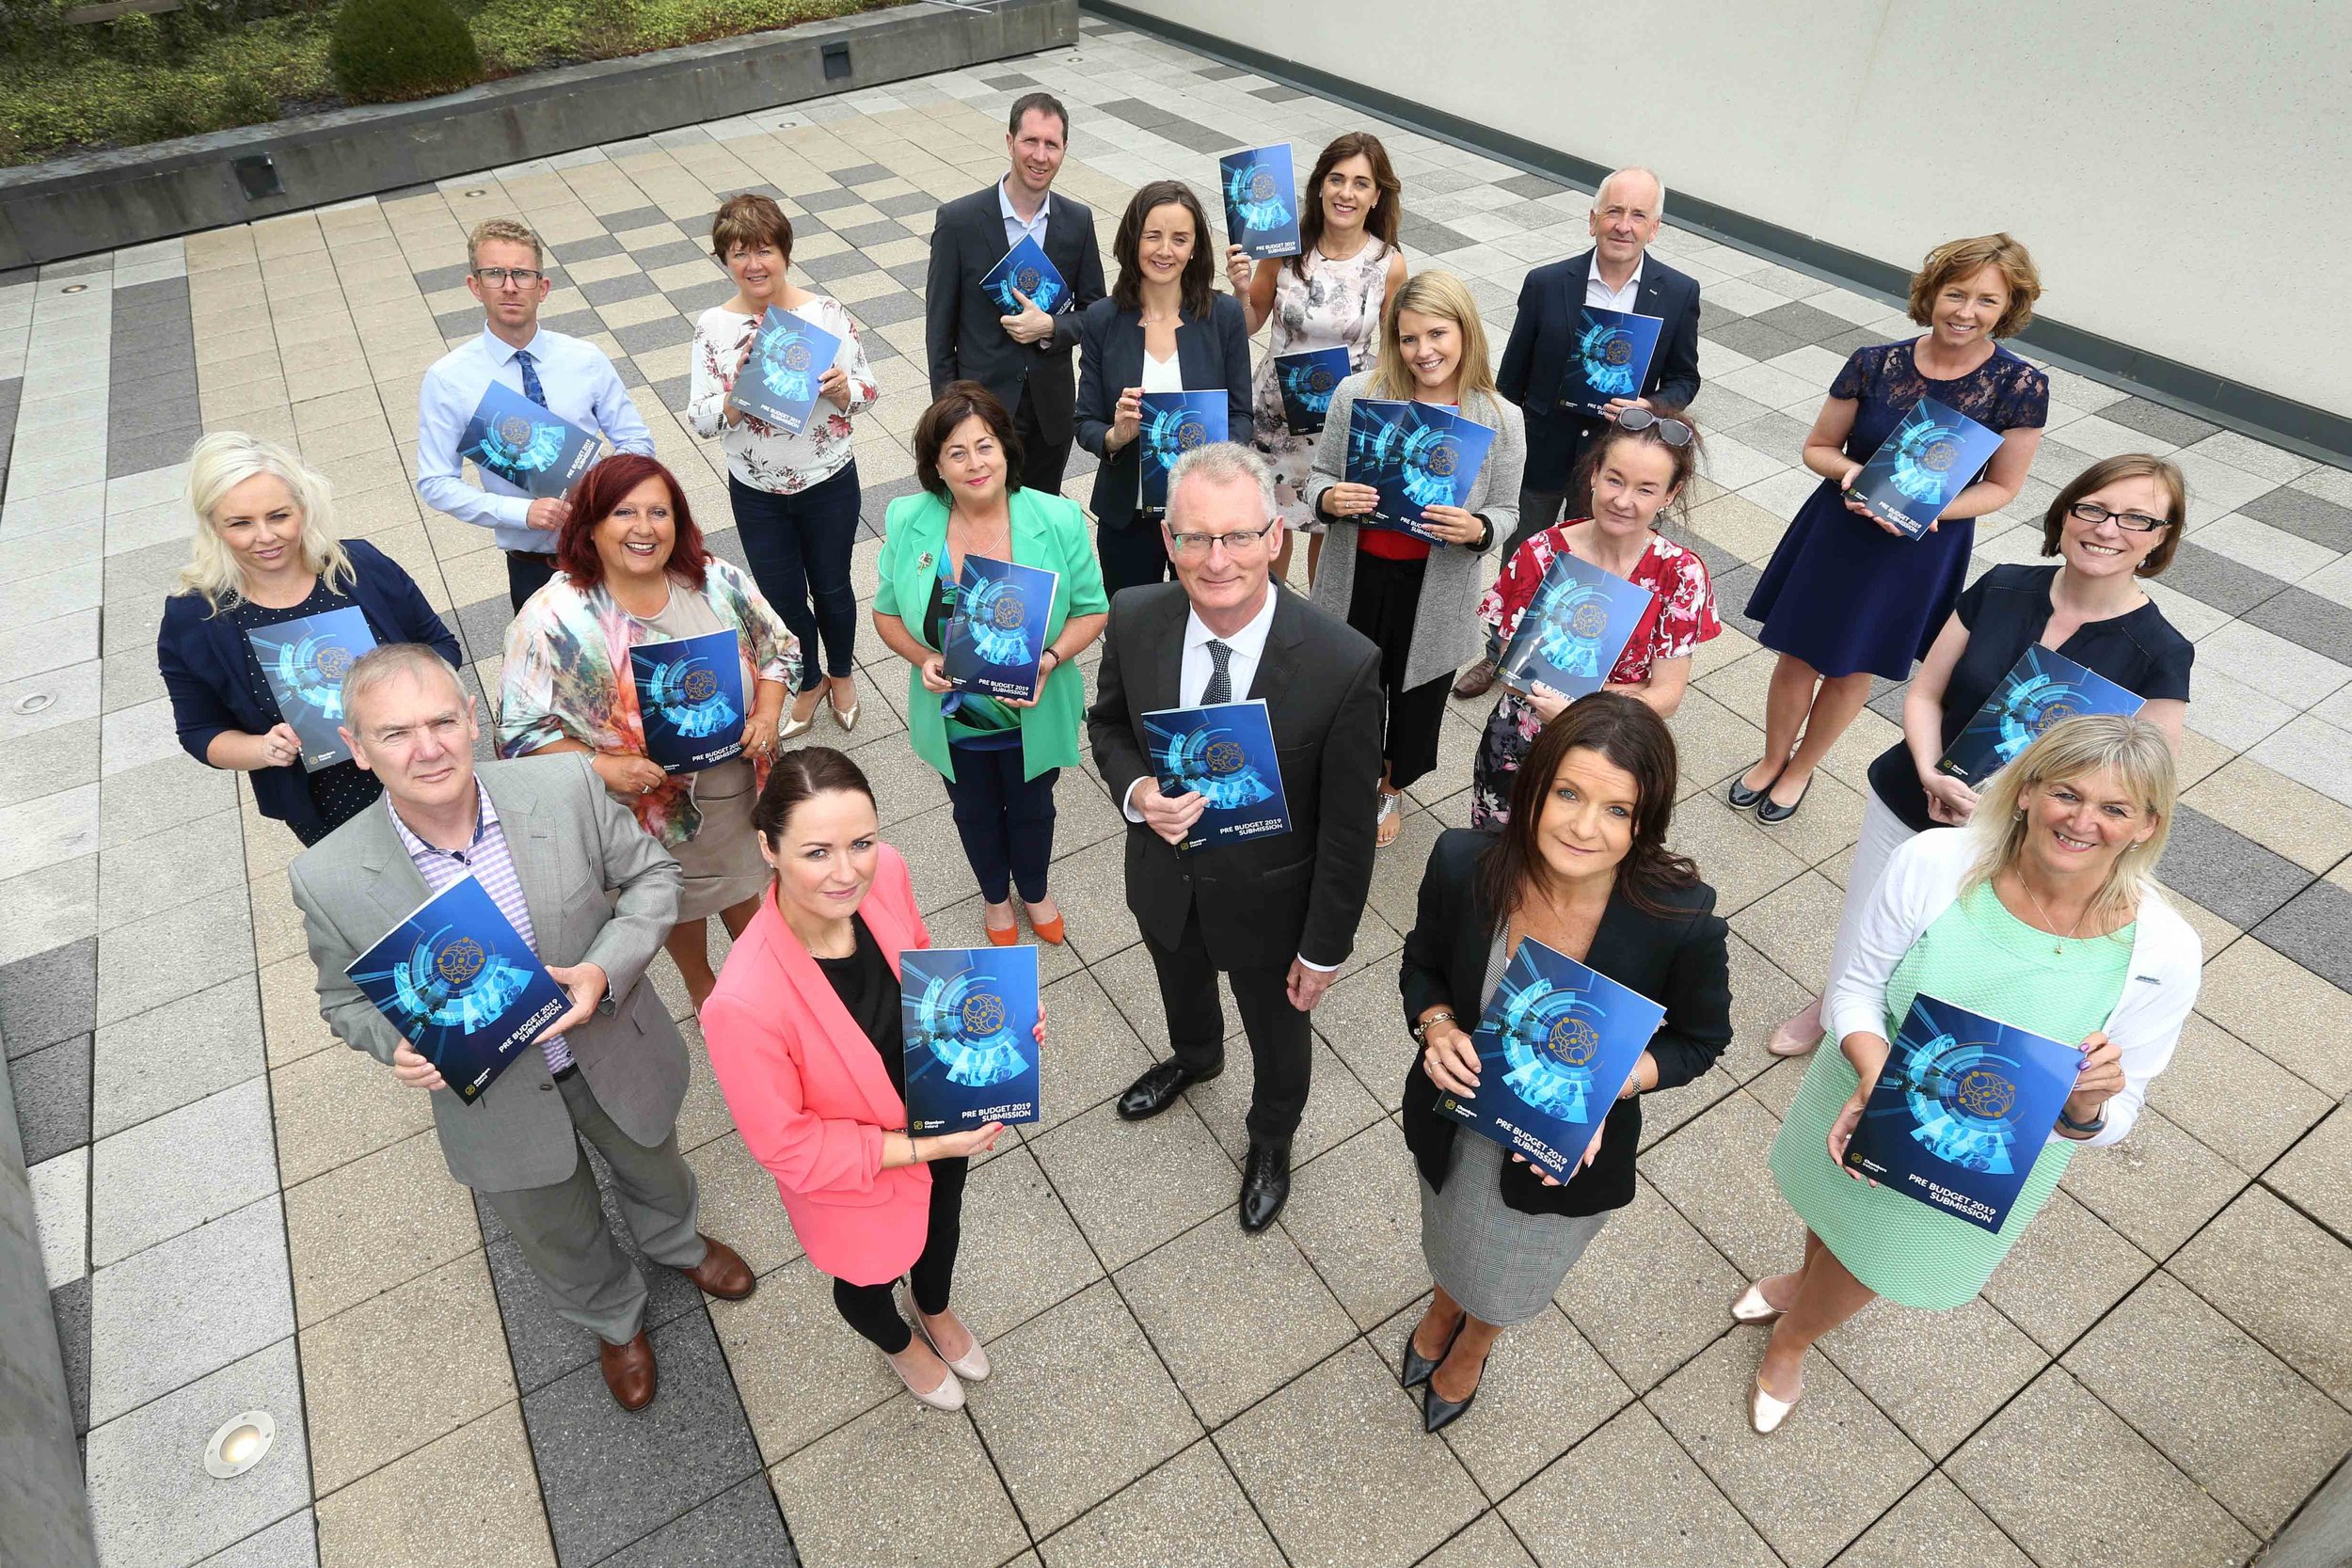  Members of the Chamber Network from all over Ireland, launch their Pre-Budget Submission 2019.   